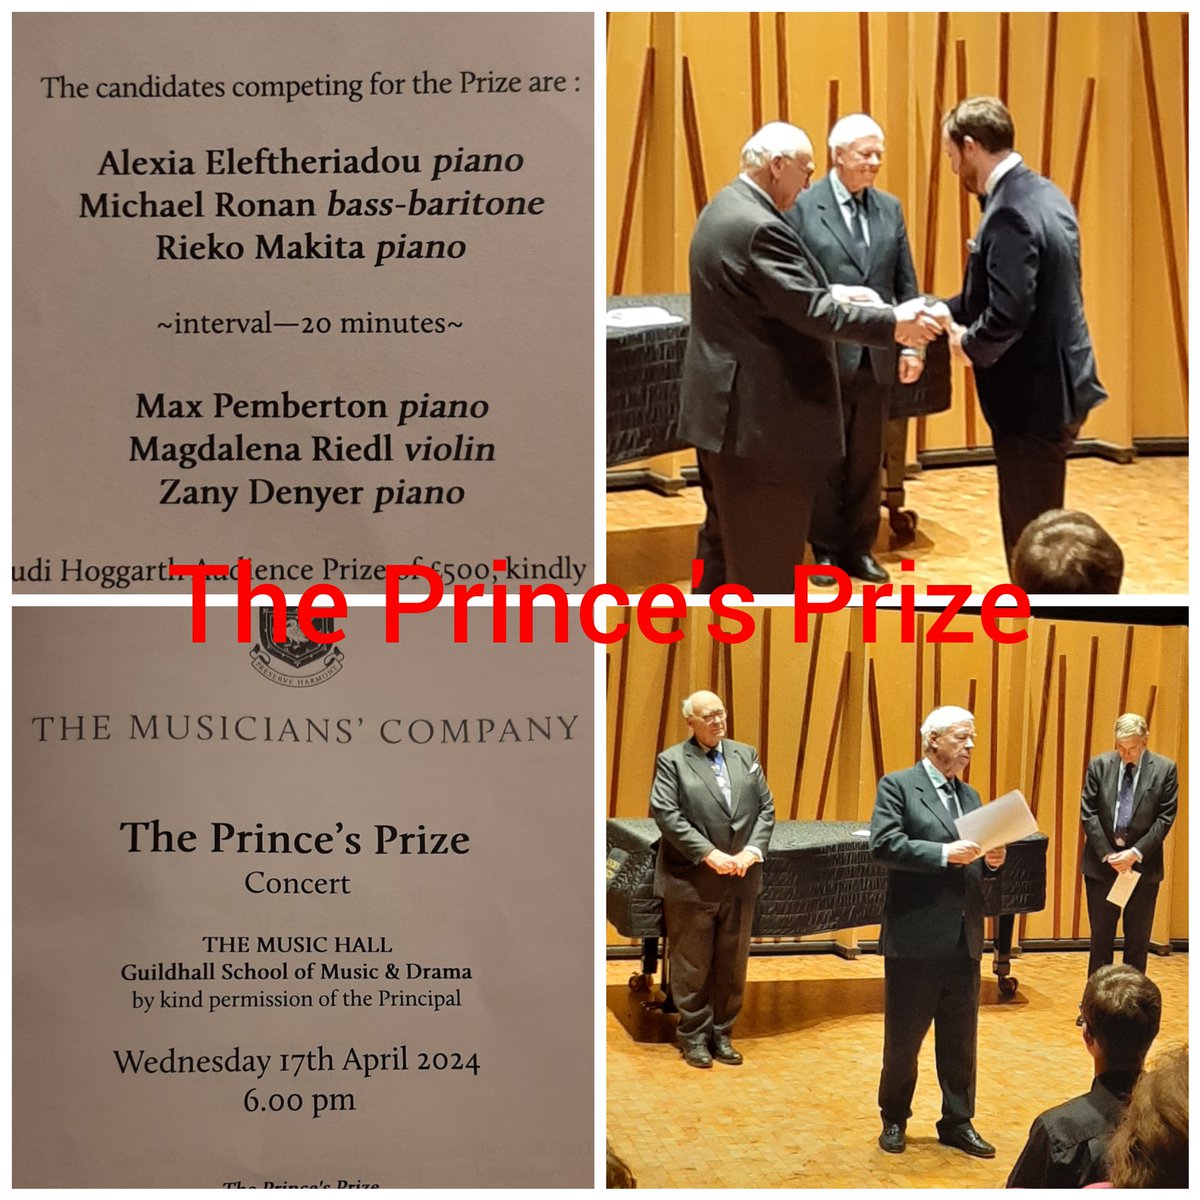 @MusiciansComp for The Prince's Prize Concert. Such amazing young talent from the Company's award winners 2024! Michael Ronan bass-baritone was the winner with Zany Denyer pianist, winning the Audience Prize. Bravi tutti! 👏👏👏